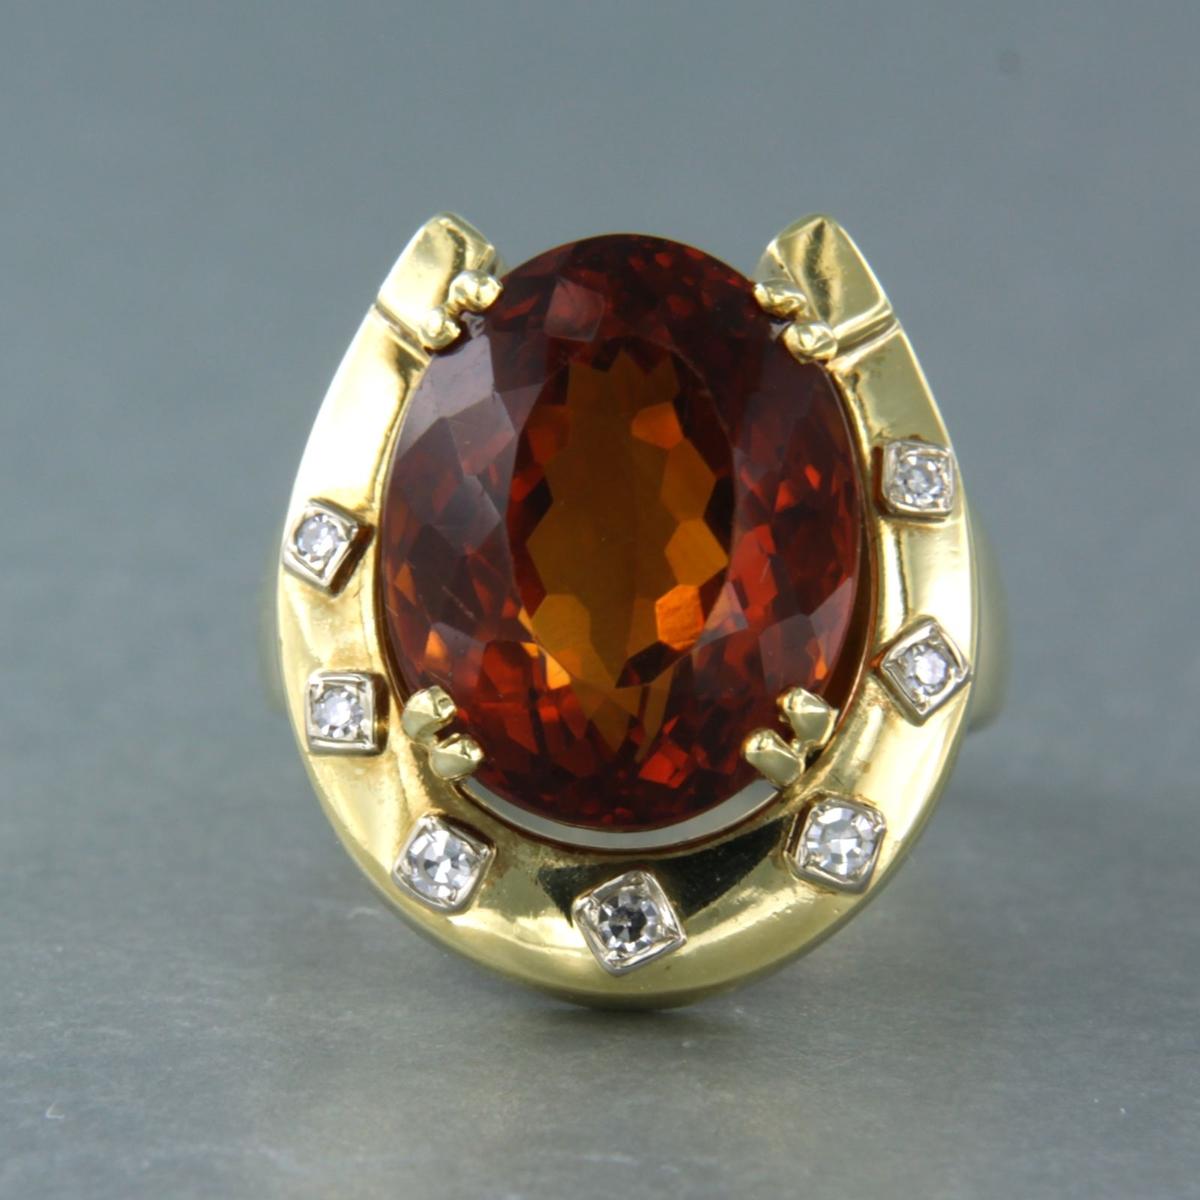 18k yellow gold ring set with citrine and single cut diamond 0.20 ct F/G-VS/SI, ring size U.S. 7.25 - EU. 17.5 (55)

detailed description:

The top of the ring is 2.1 cm wide

weight 11.8 grams,

ring size US 7.25 - EU. 17.5 (55), ring can be